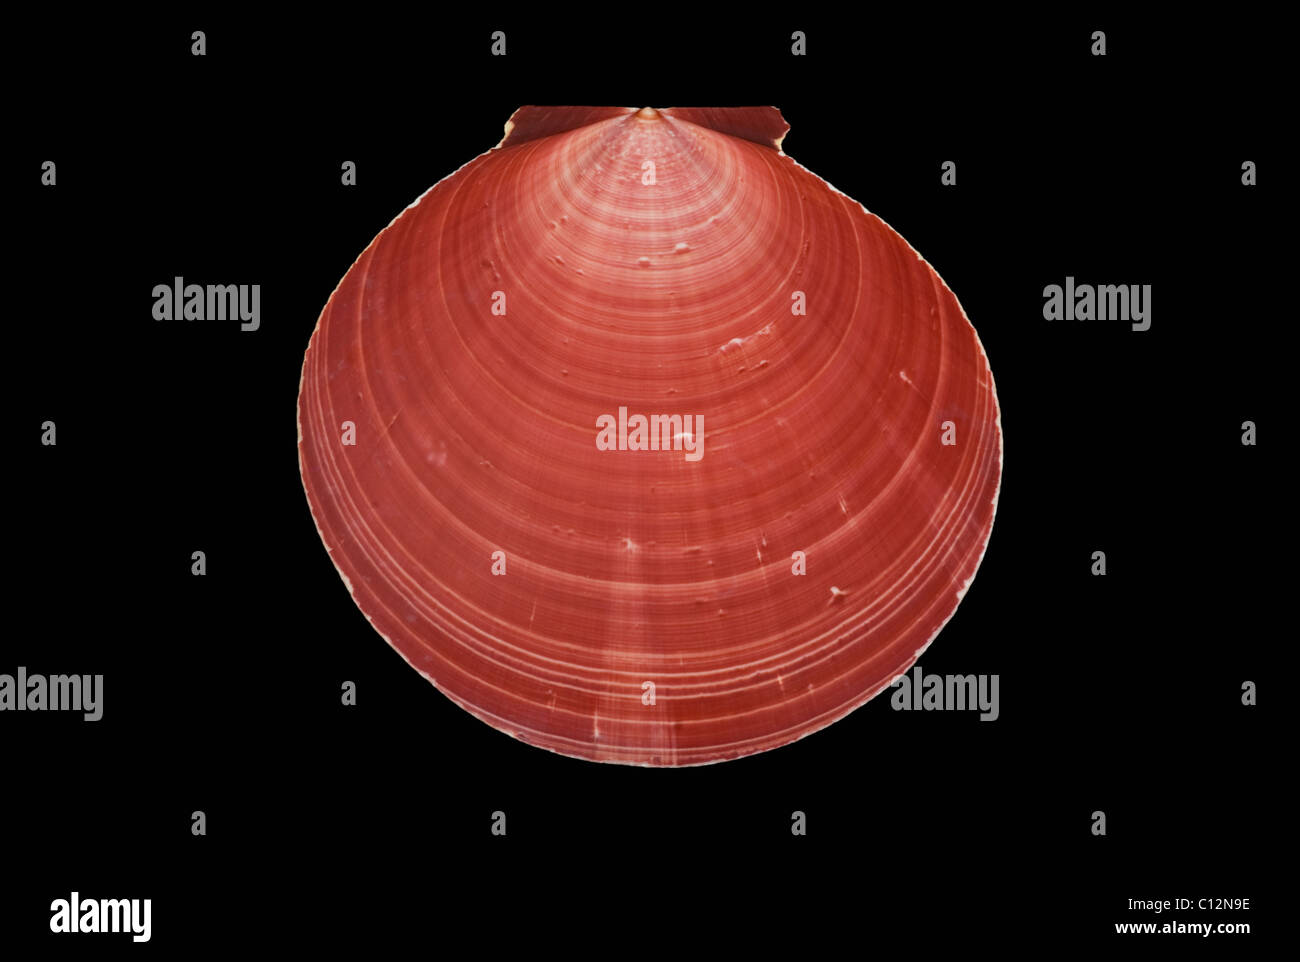 Rose red clam shell isolated with encircled lighter lines showing design of the shell. Stock Photo